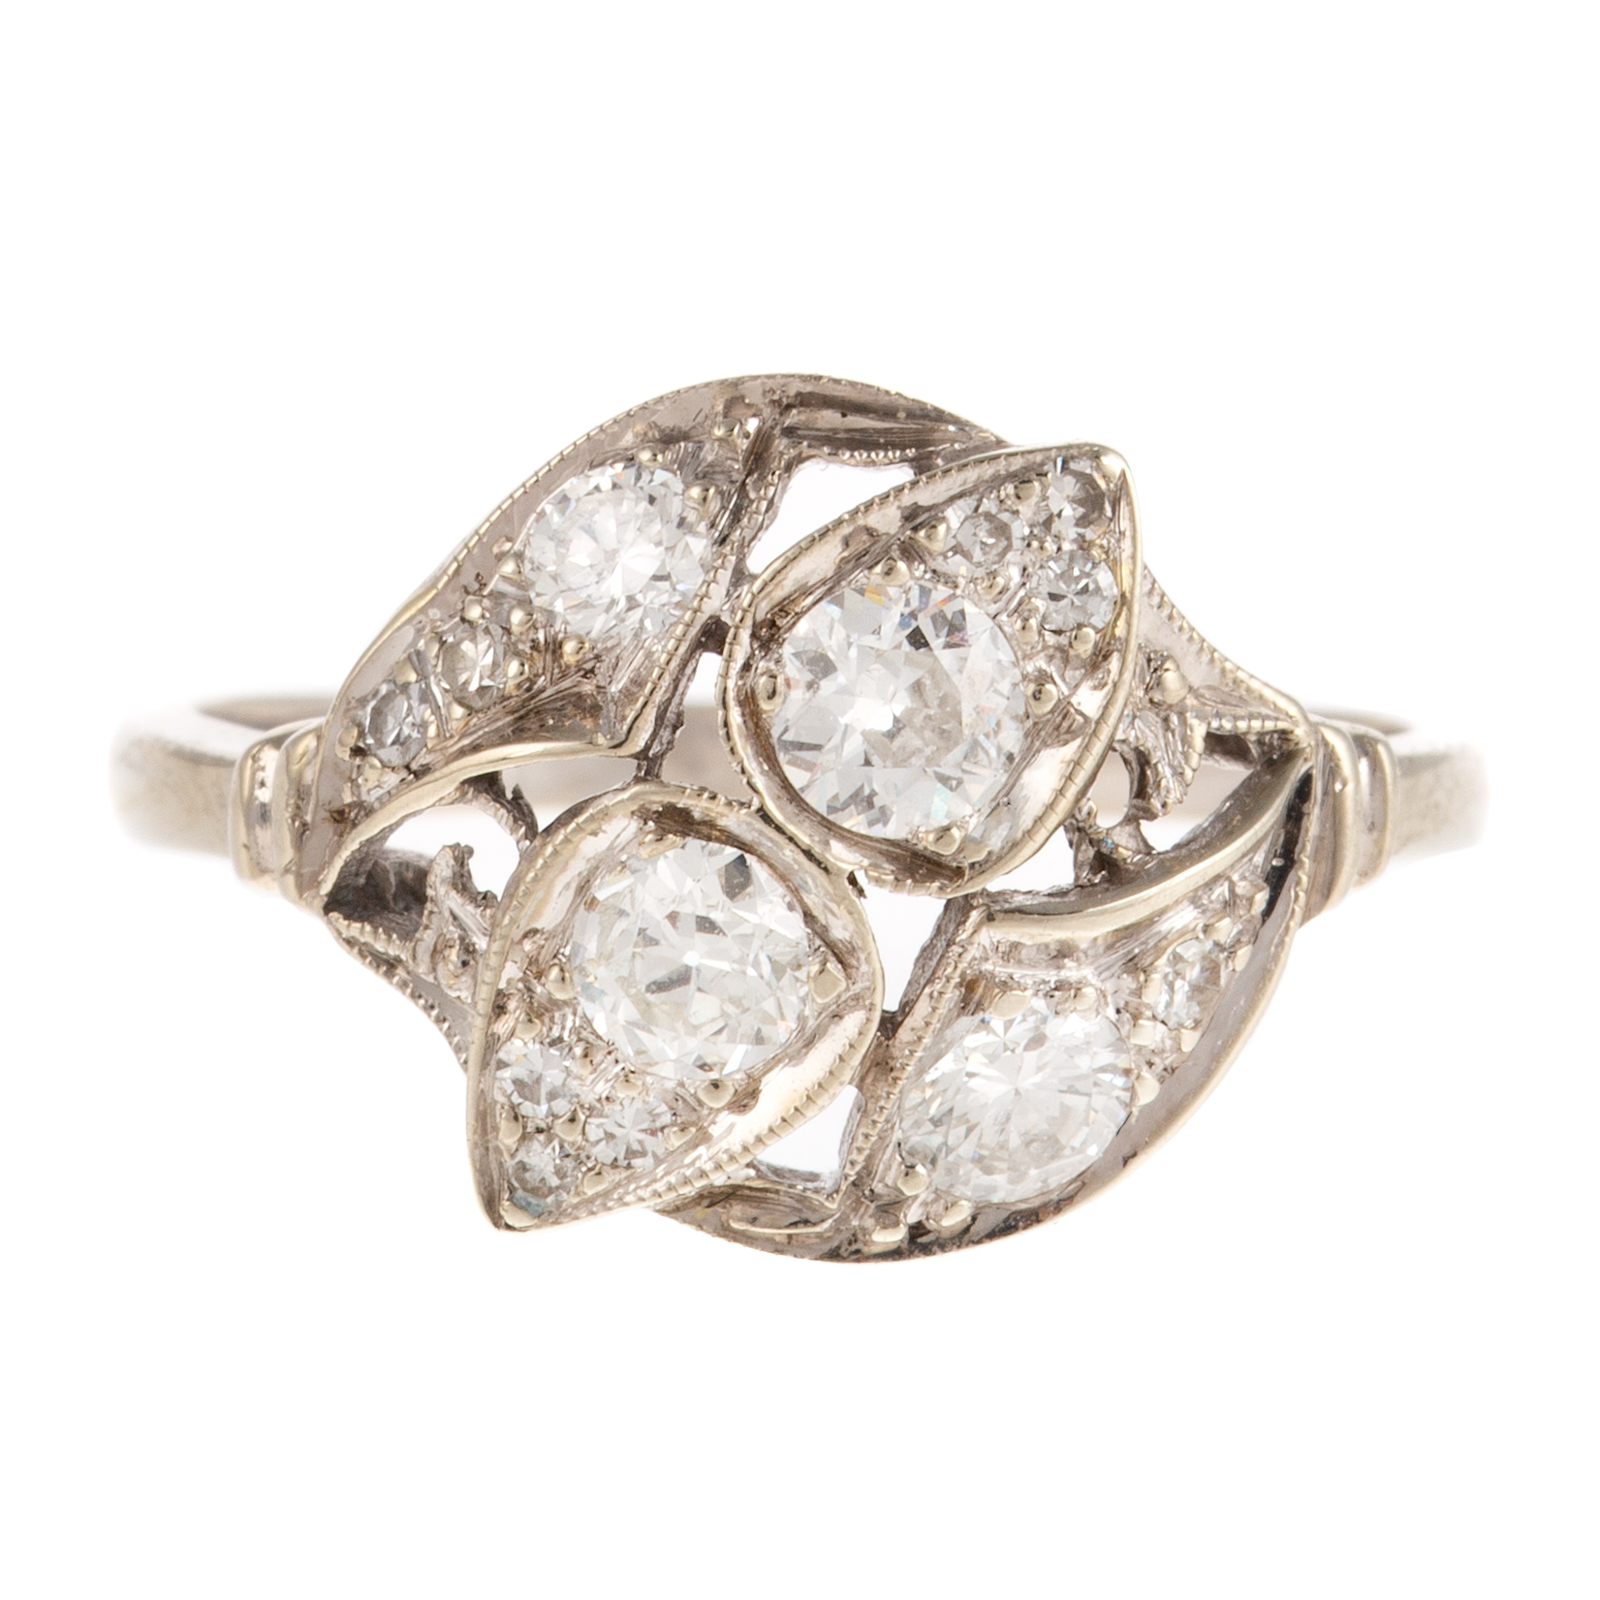 A VINTAGE DIAMOND RING IN 14K BY